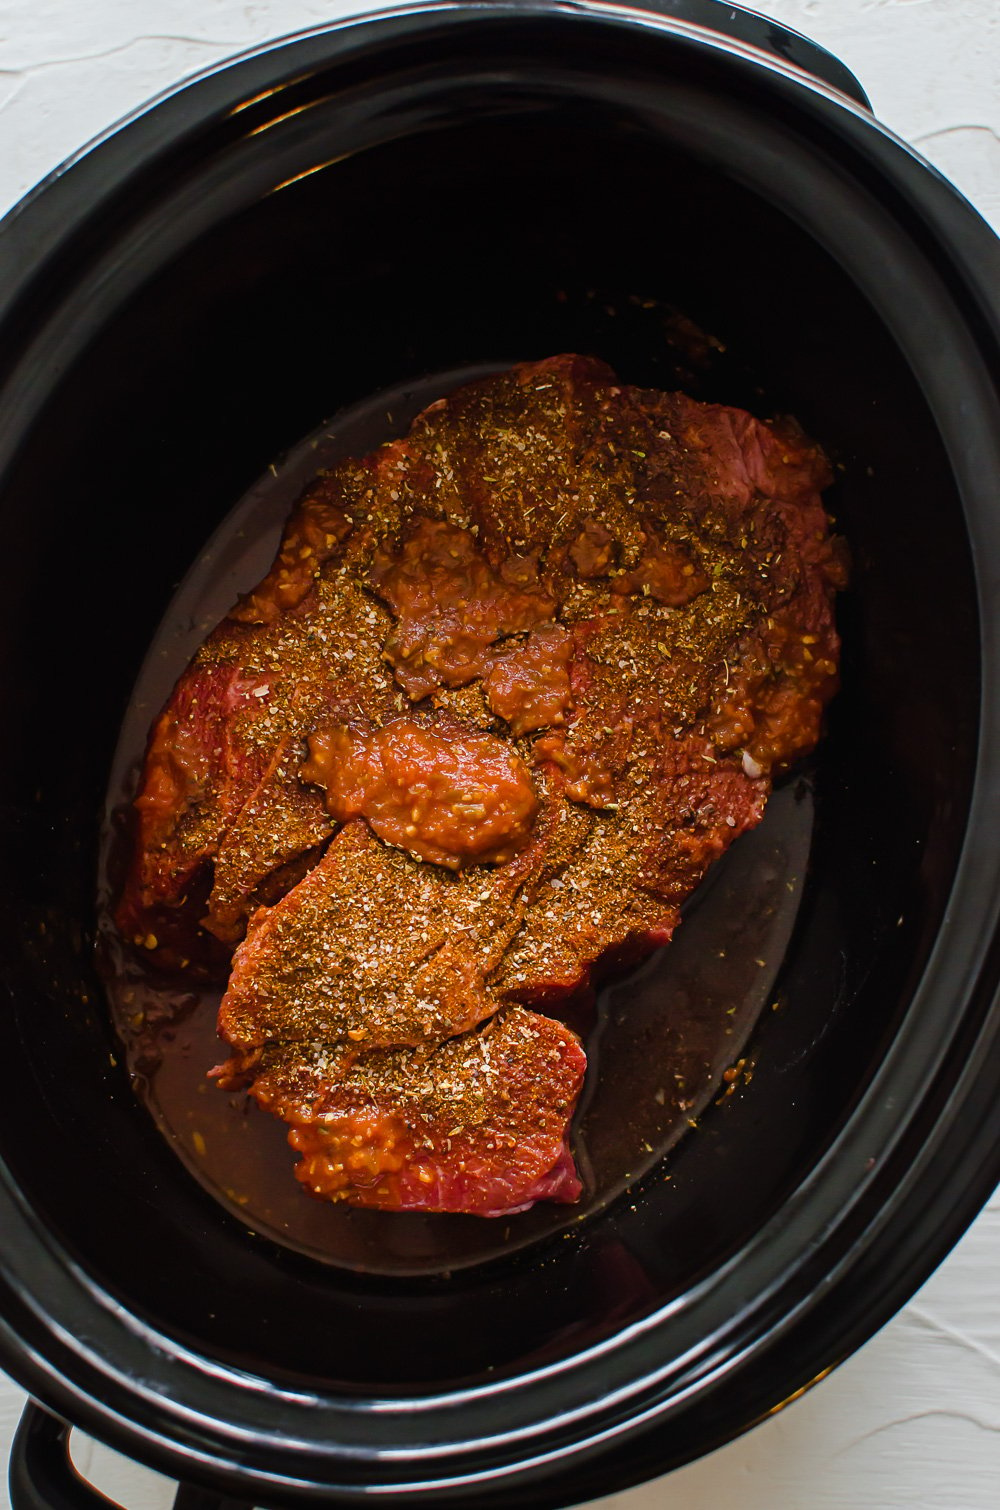 Seasoned chuck roast in a slow cooker with salsa poured over top.